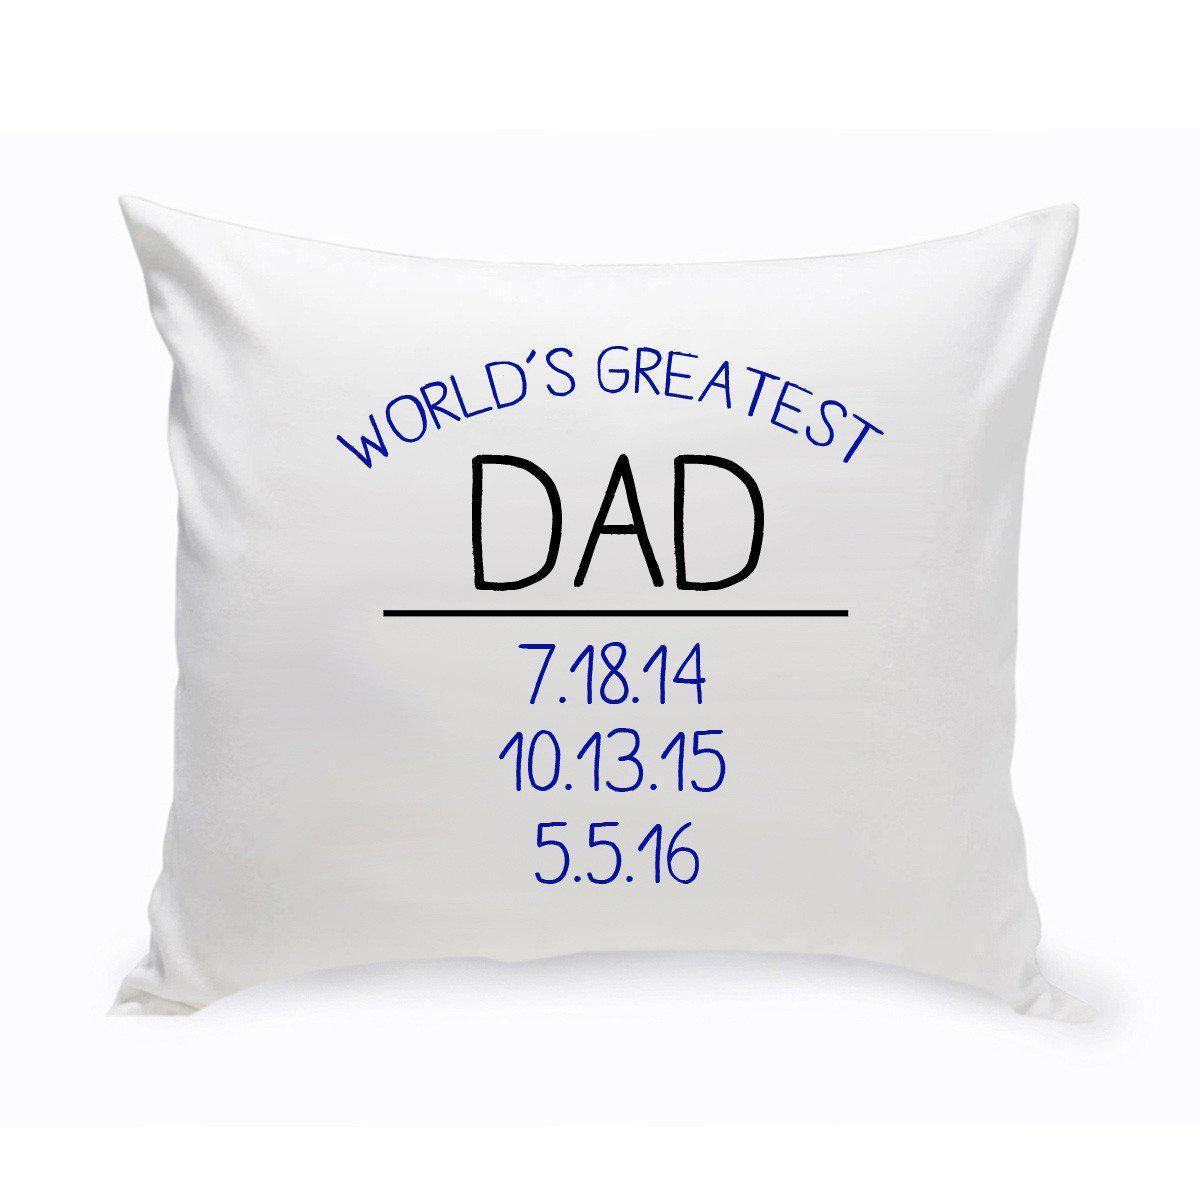 Personalized World's Greatest Dad Throw Pillow - Way Up Gifts